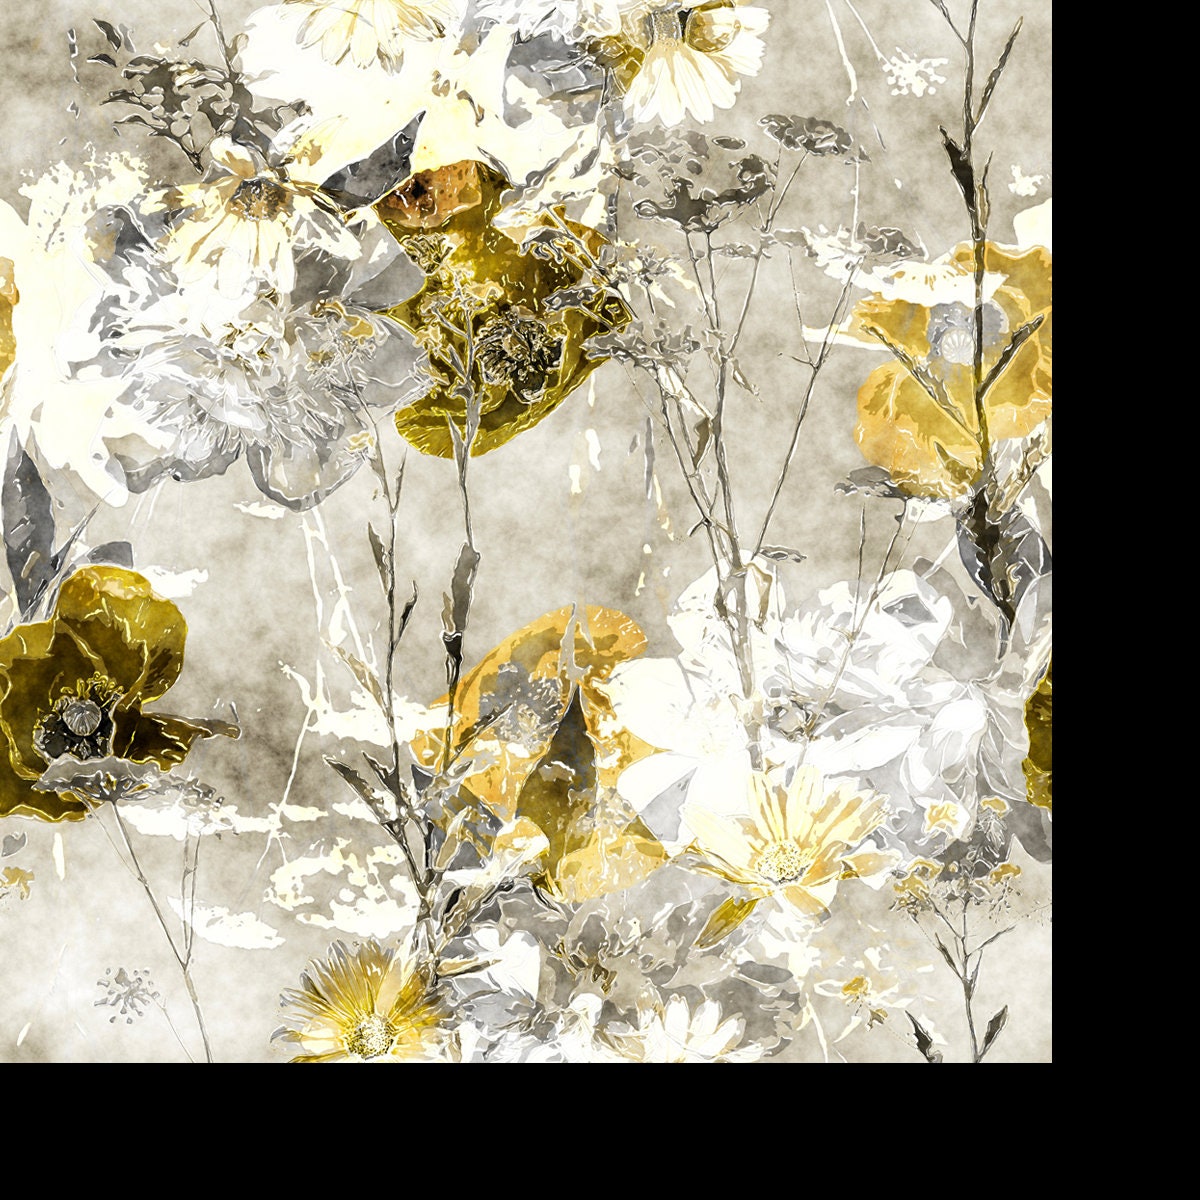 Art Vintage Watercolor Monochrome Floral Pattern with Old Gold and White Poppies, Peonies, Roses, Leaves and Grasses Wallpaper Living Room